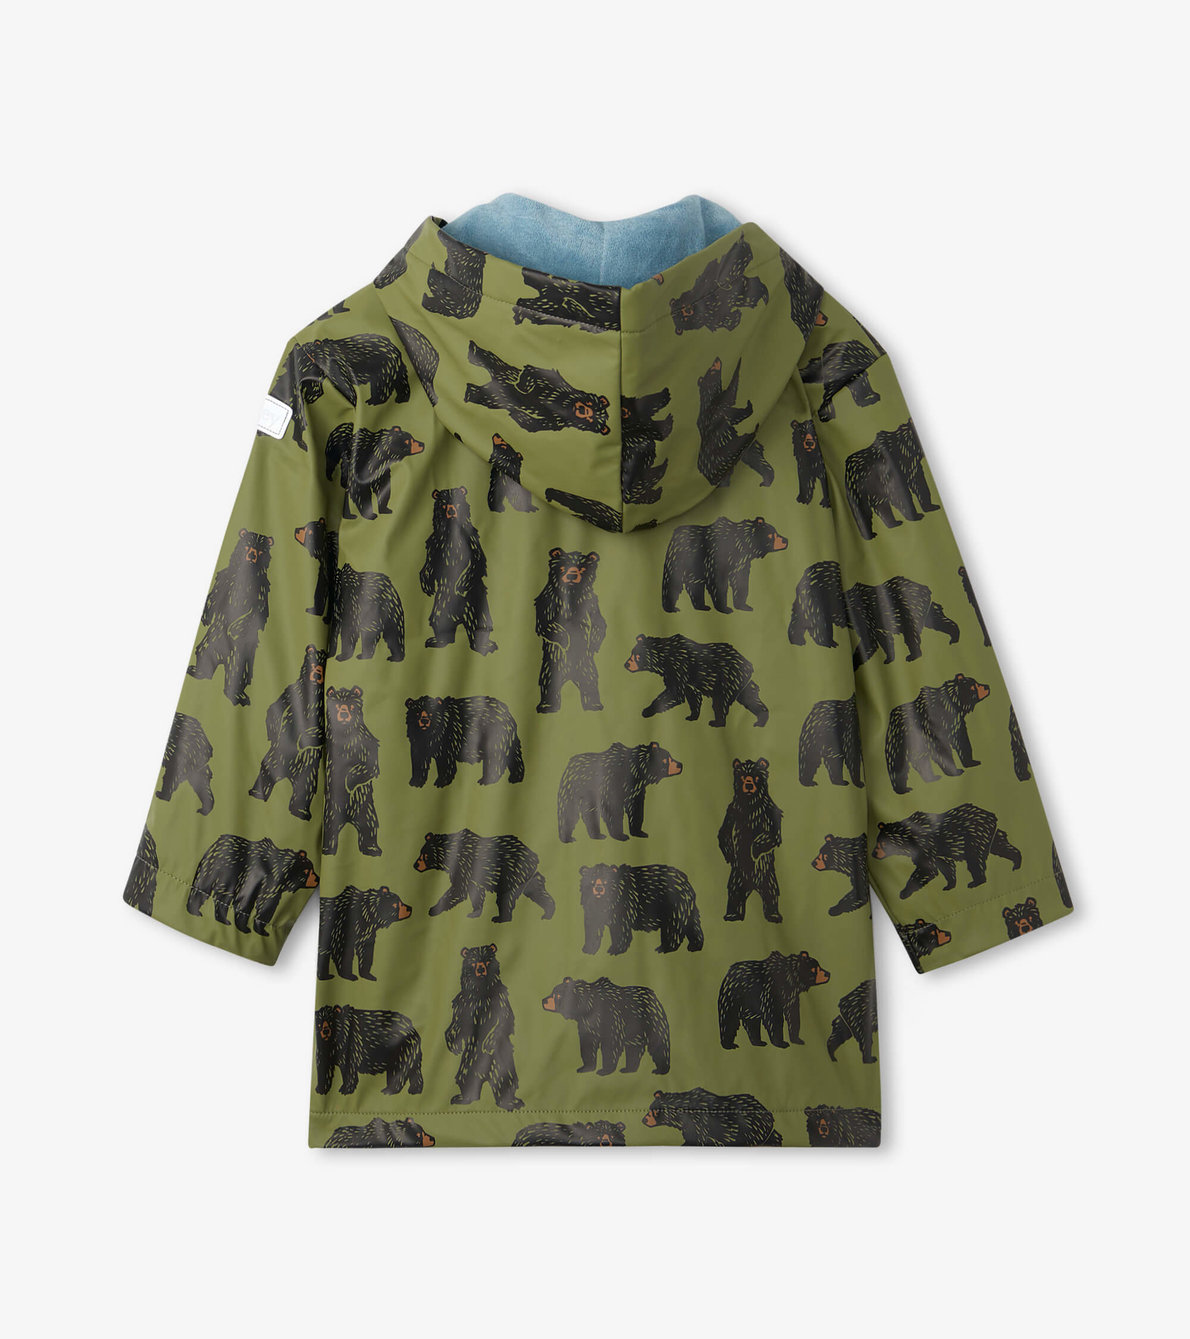 View larger image of Wild Bears Raincoat